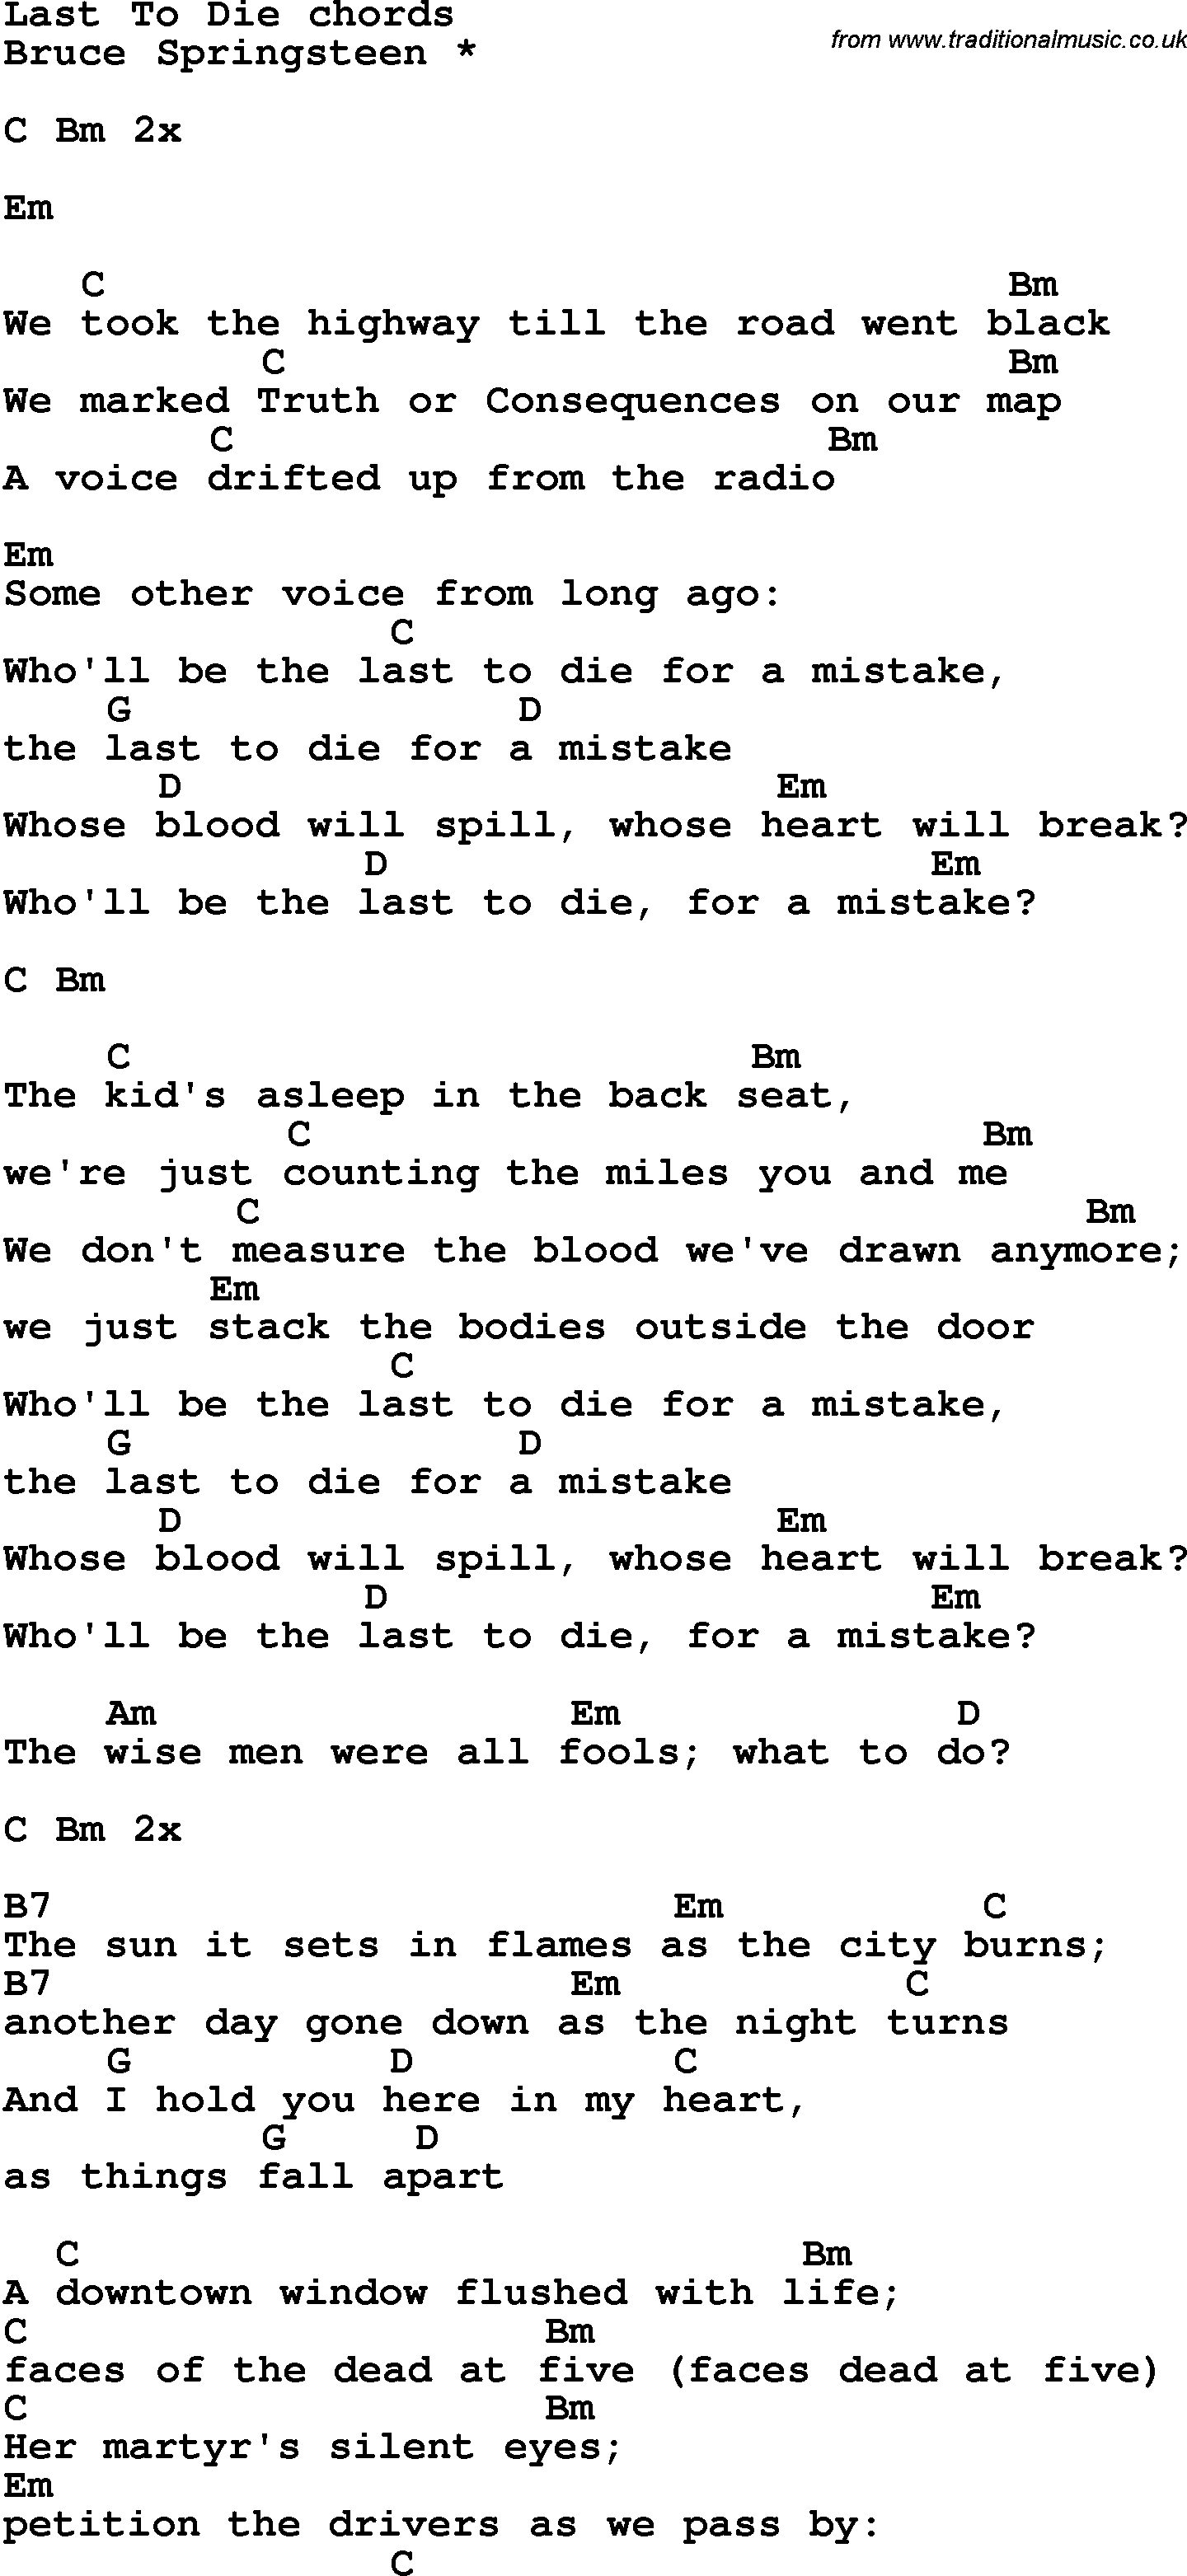 Song Lyrics with guitar chords for Last To Die